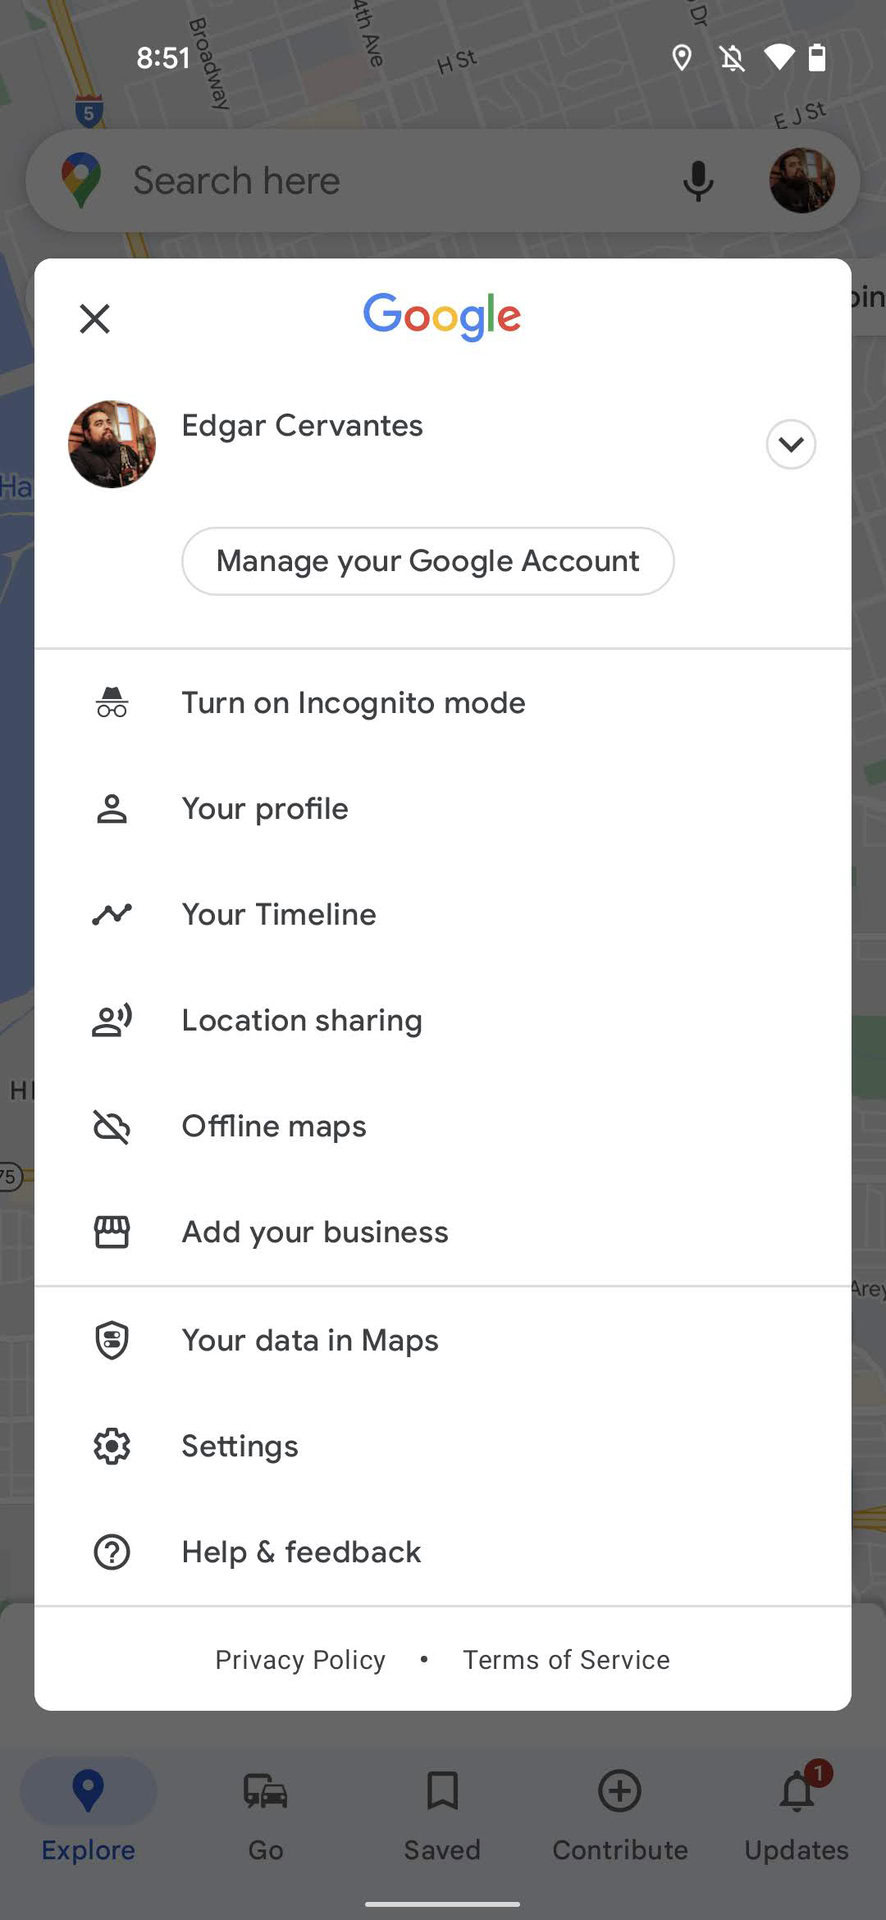 Delete offline maps on Google Maps 1 - How to free up storage space on Android